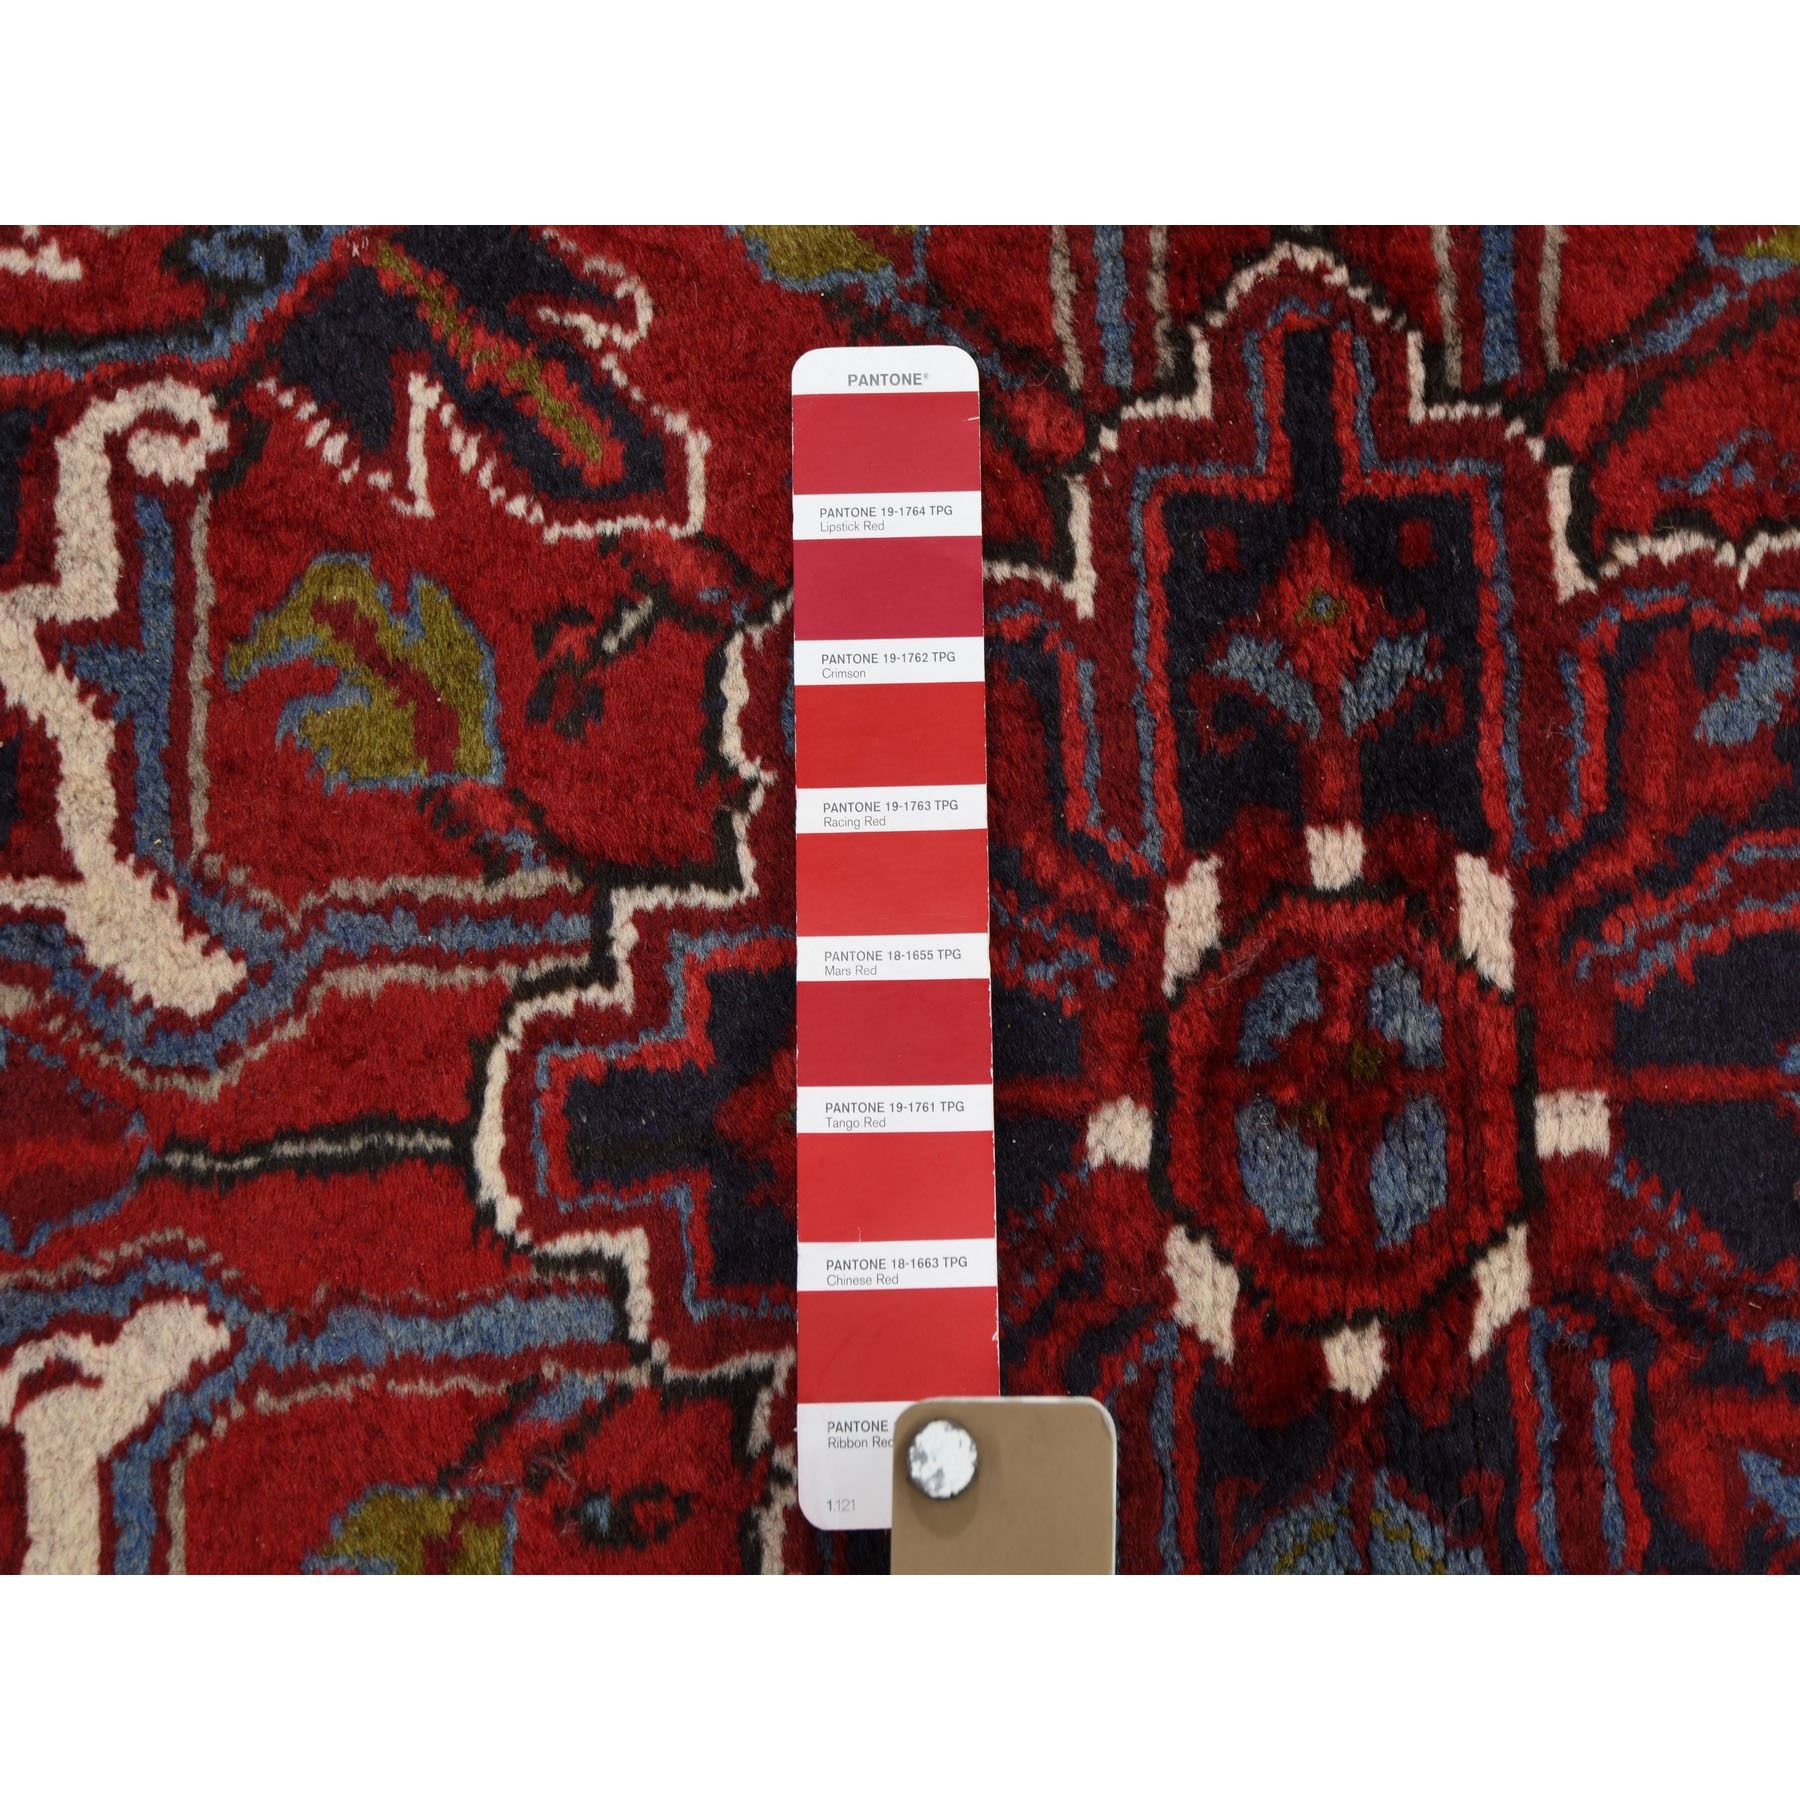 7-6 x10-6  Red Semi Antique Persian Heriz Geometric Design Thick and Plush Hand Knotted Oriental Rug 